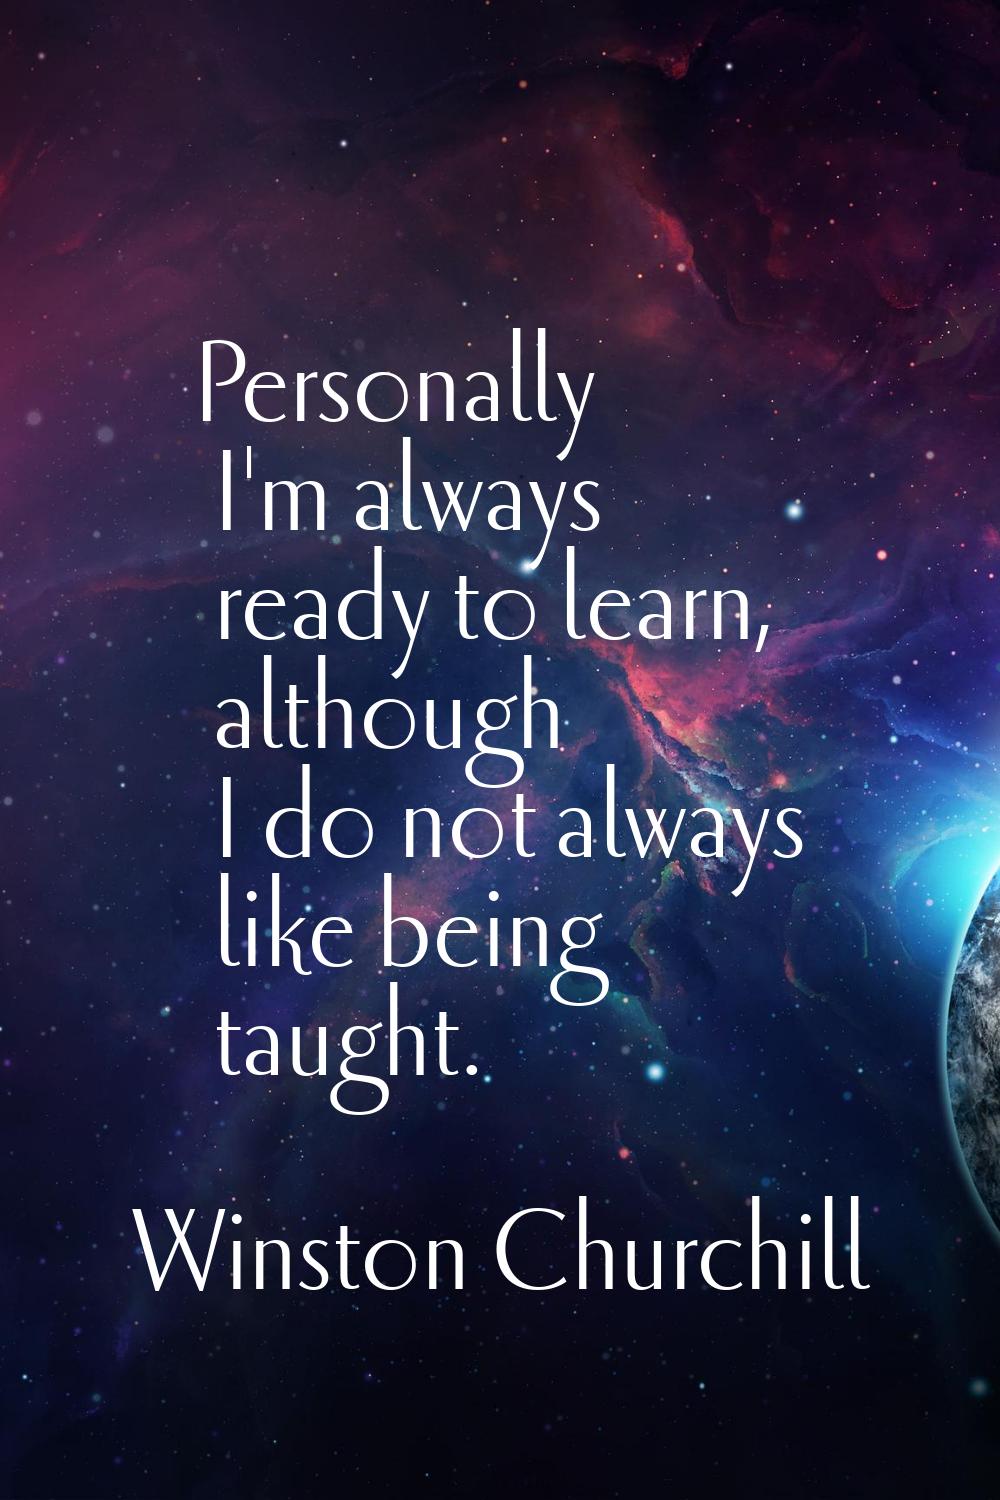 Personally I'm always ready to learn, although I do not always like being taught.